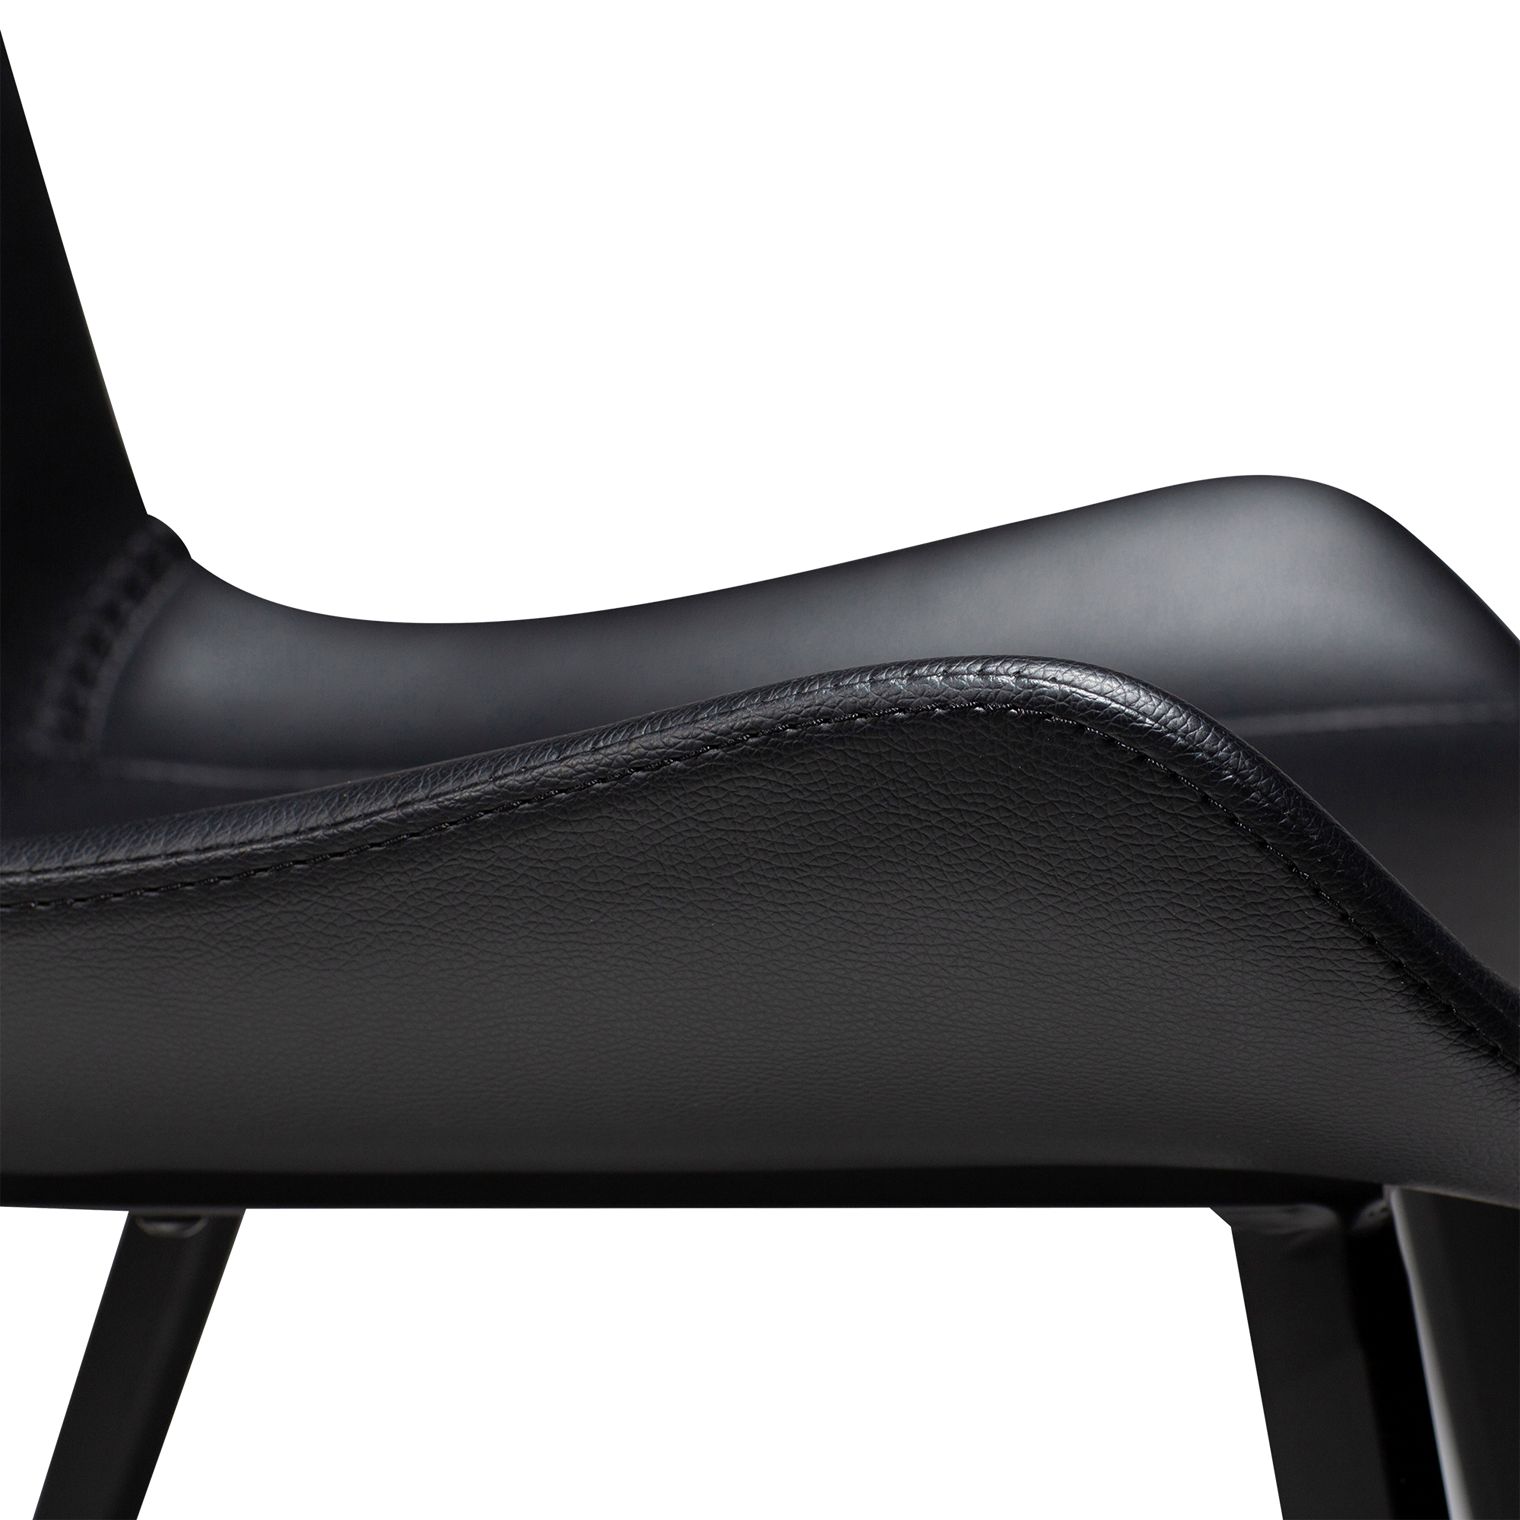 HYPE BLACK chair by Dan Form